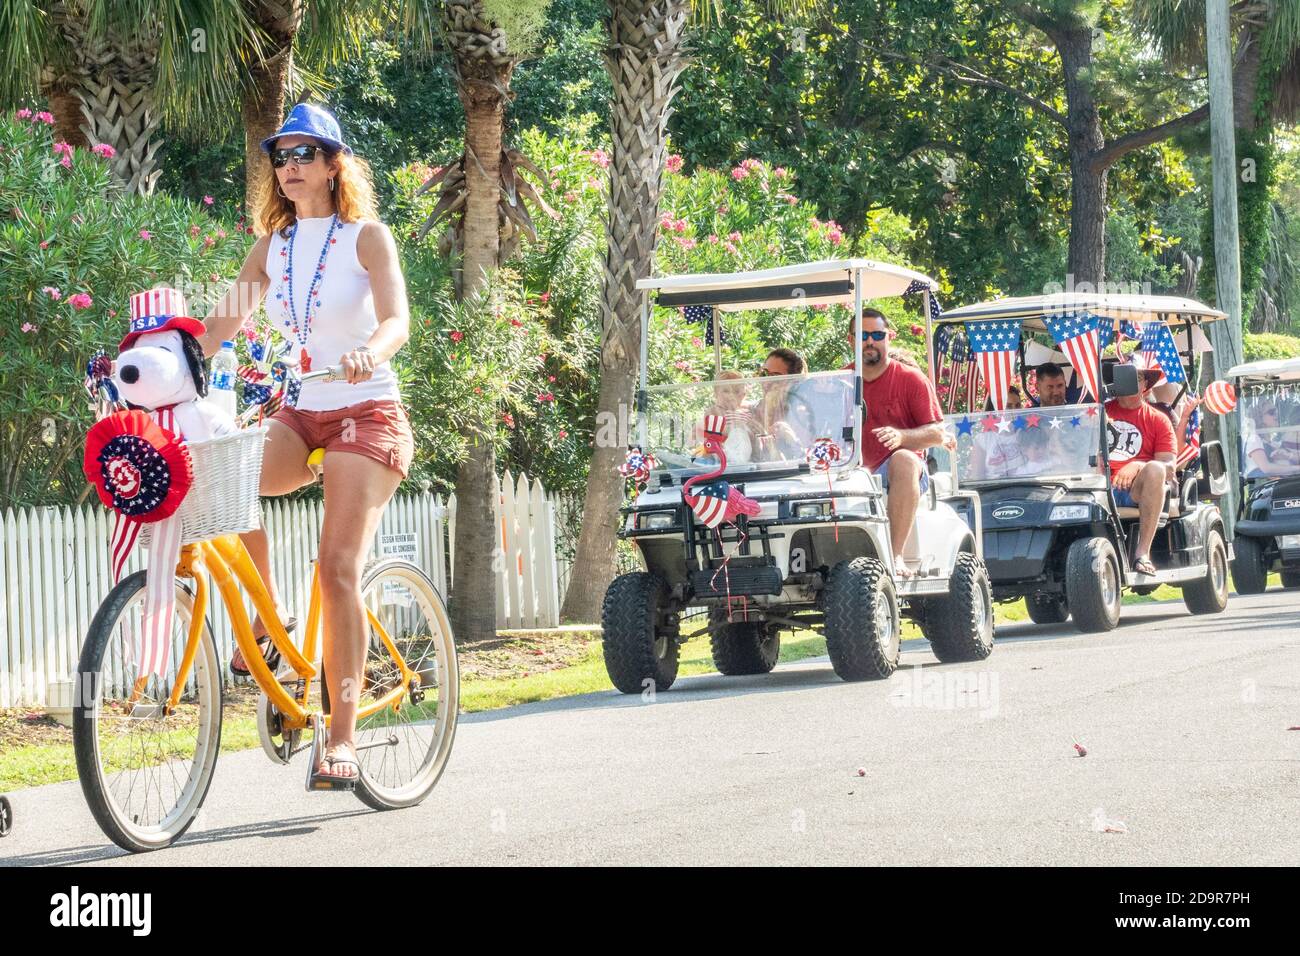 Dressed in costumes bicyclists and decorated golf carts ride down the road during the annual Independence Day parade July 4, 2019 in Sullivan's Island, South Carolina. The tiny affluent Sea Island beach community across from Charleston holds an outsized golf cart parade featuring more than 75 decorated carts. Stock Photo